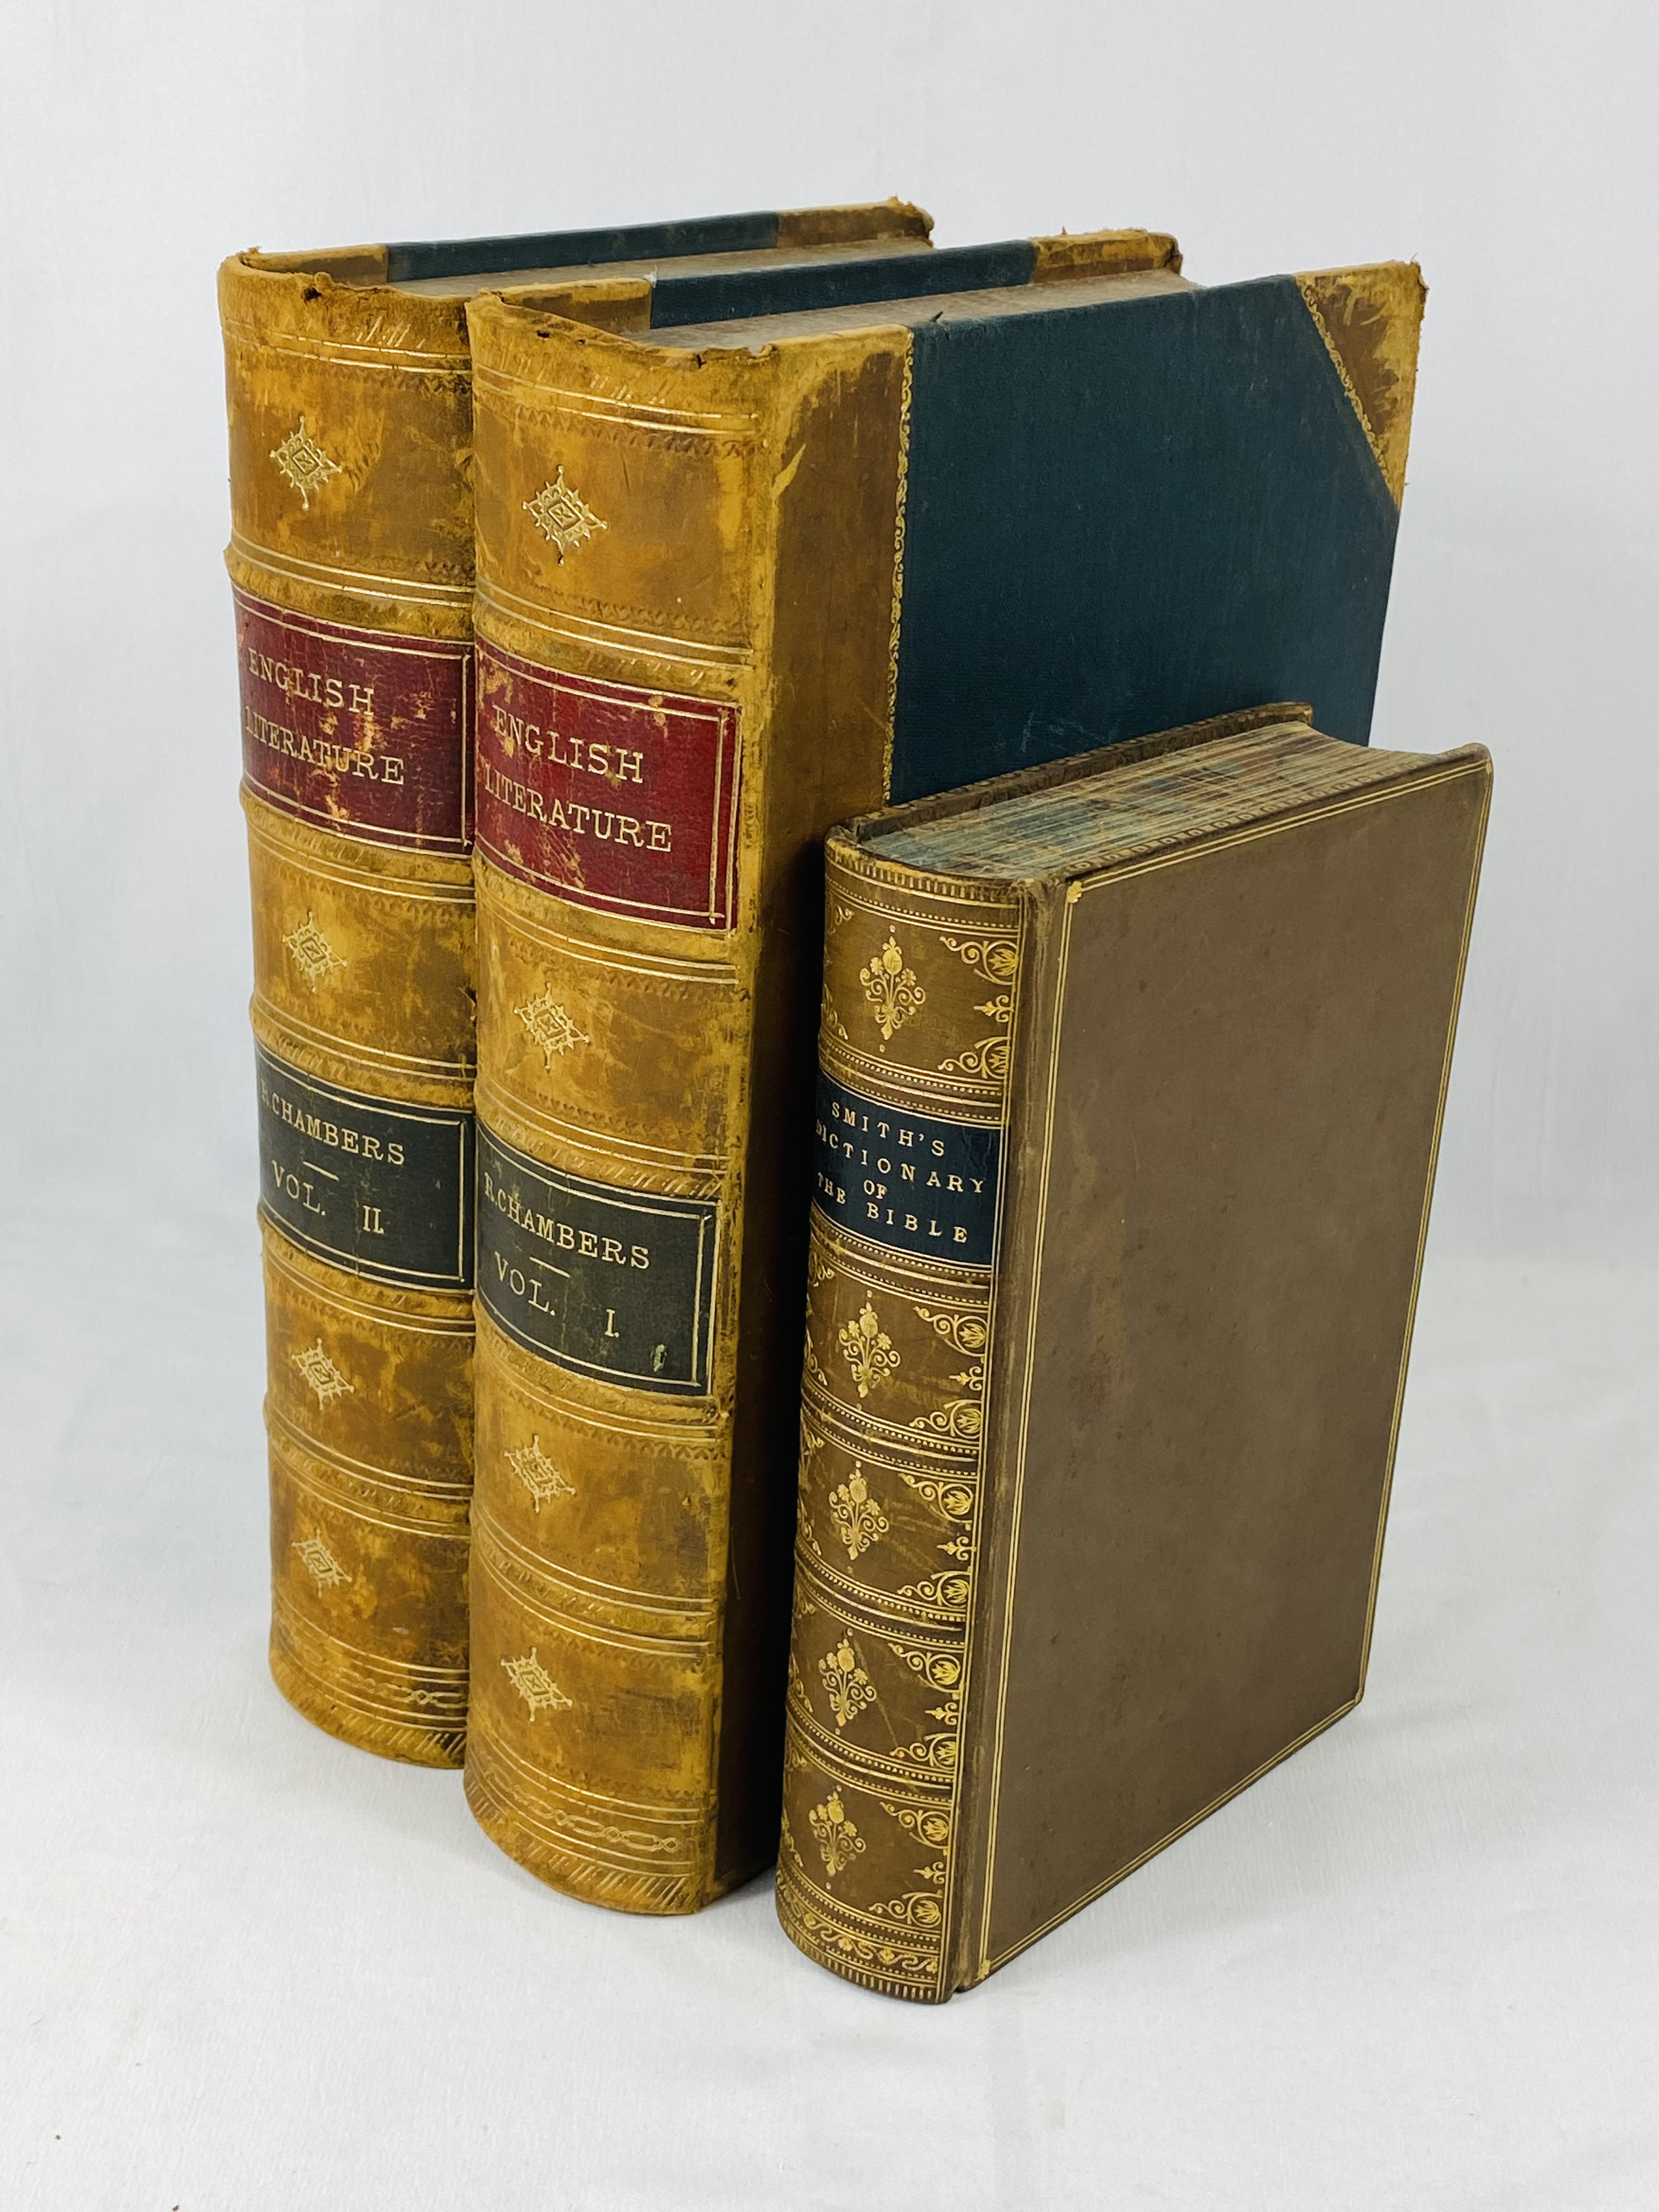 Chambers's Cyclopedia of English Literature, 1876; A Smaller Dictionary of the Bible,1880.